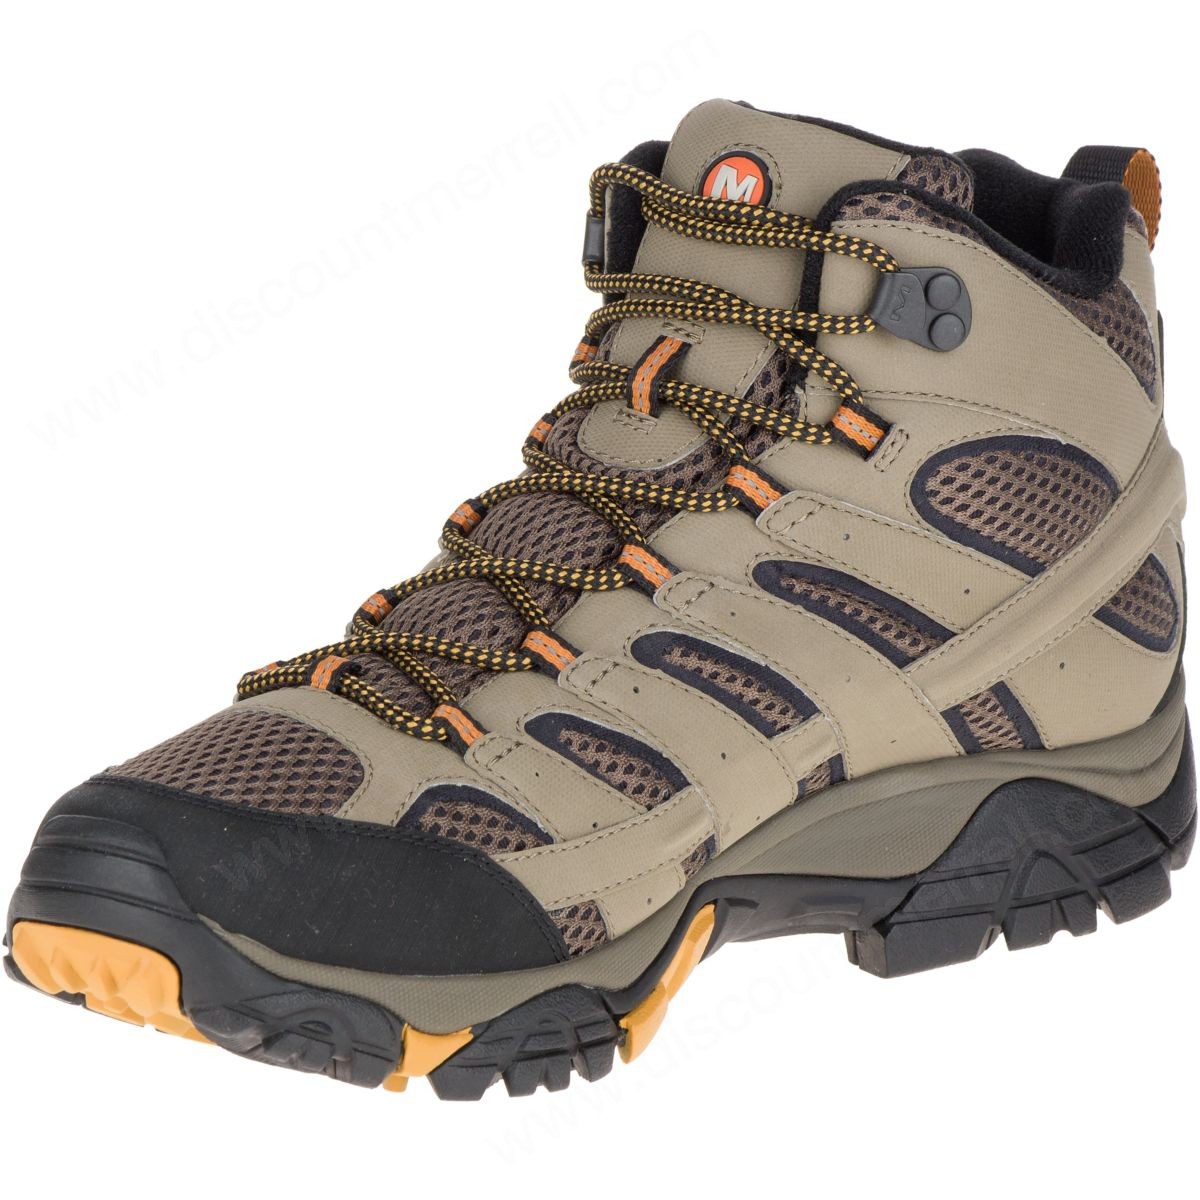 Merrell Man's Moab Mother Of All Boots™ Mid Gore-Tex® Wide Width Walnut - -5